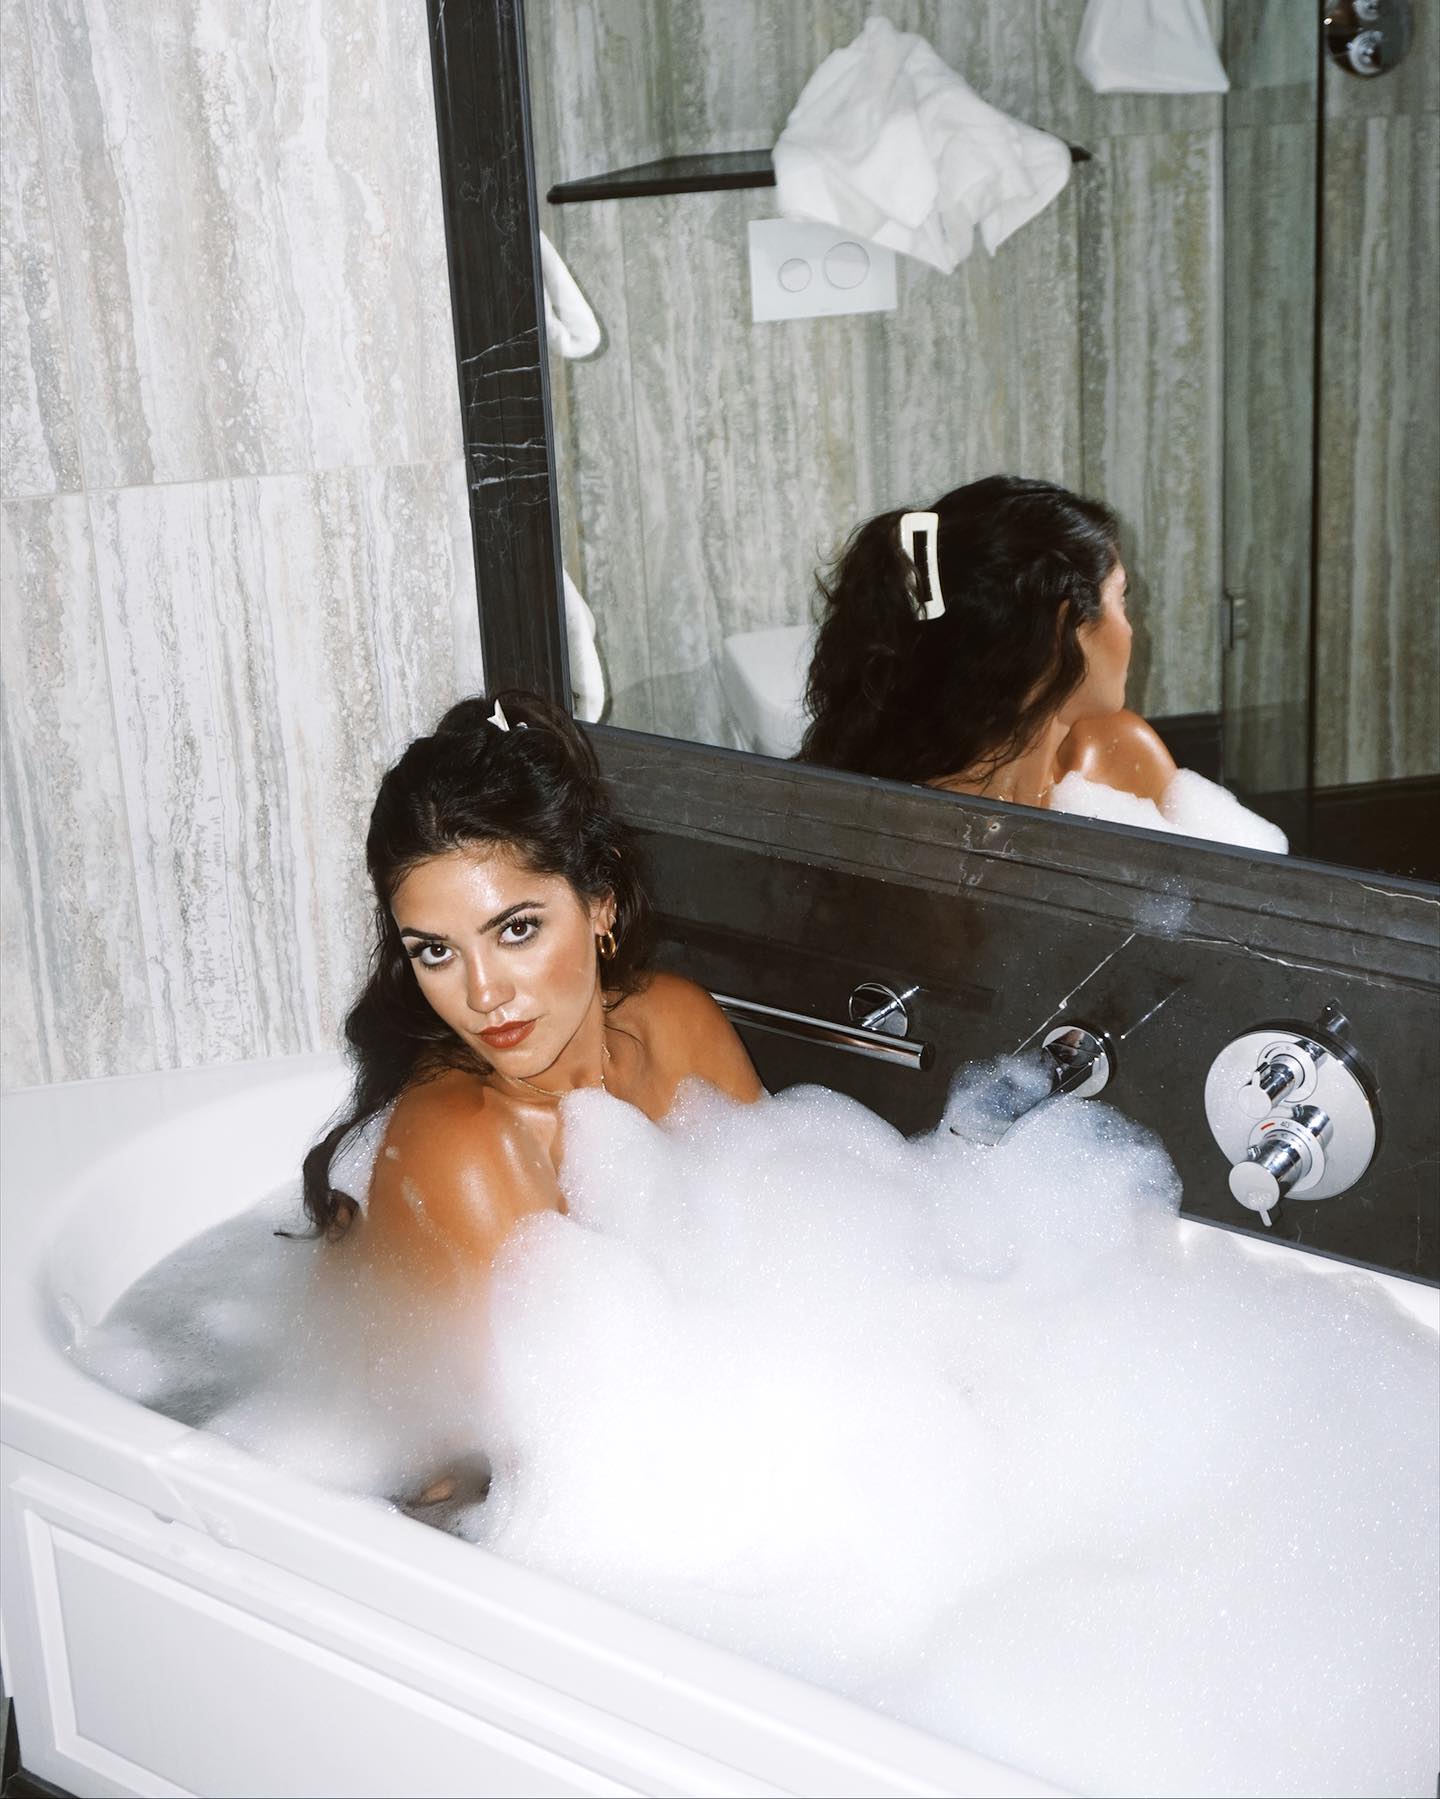 dhea ananda recommends Naked Woman In Bubble Bath